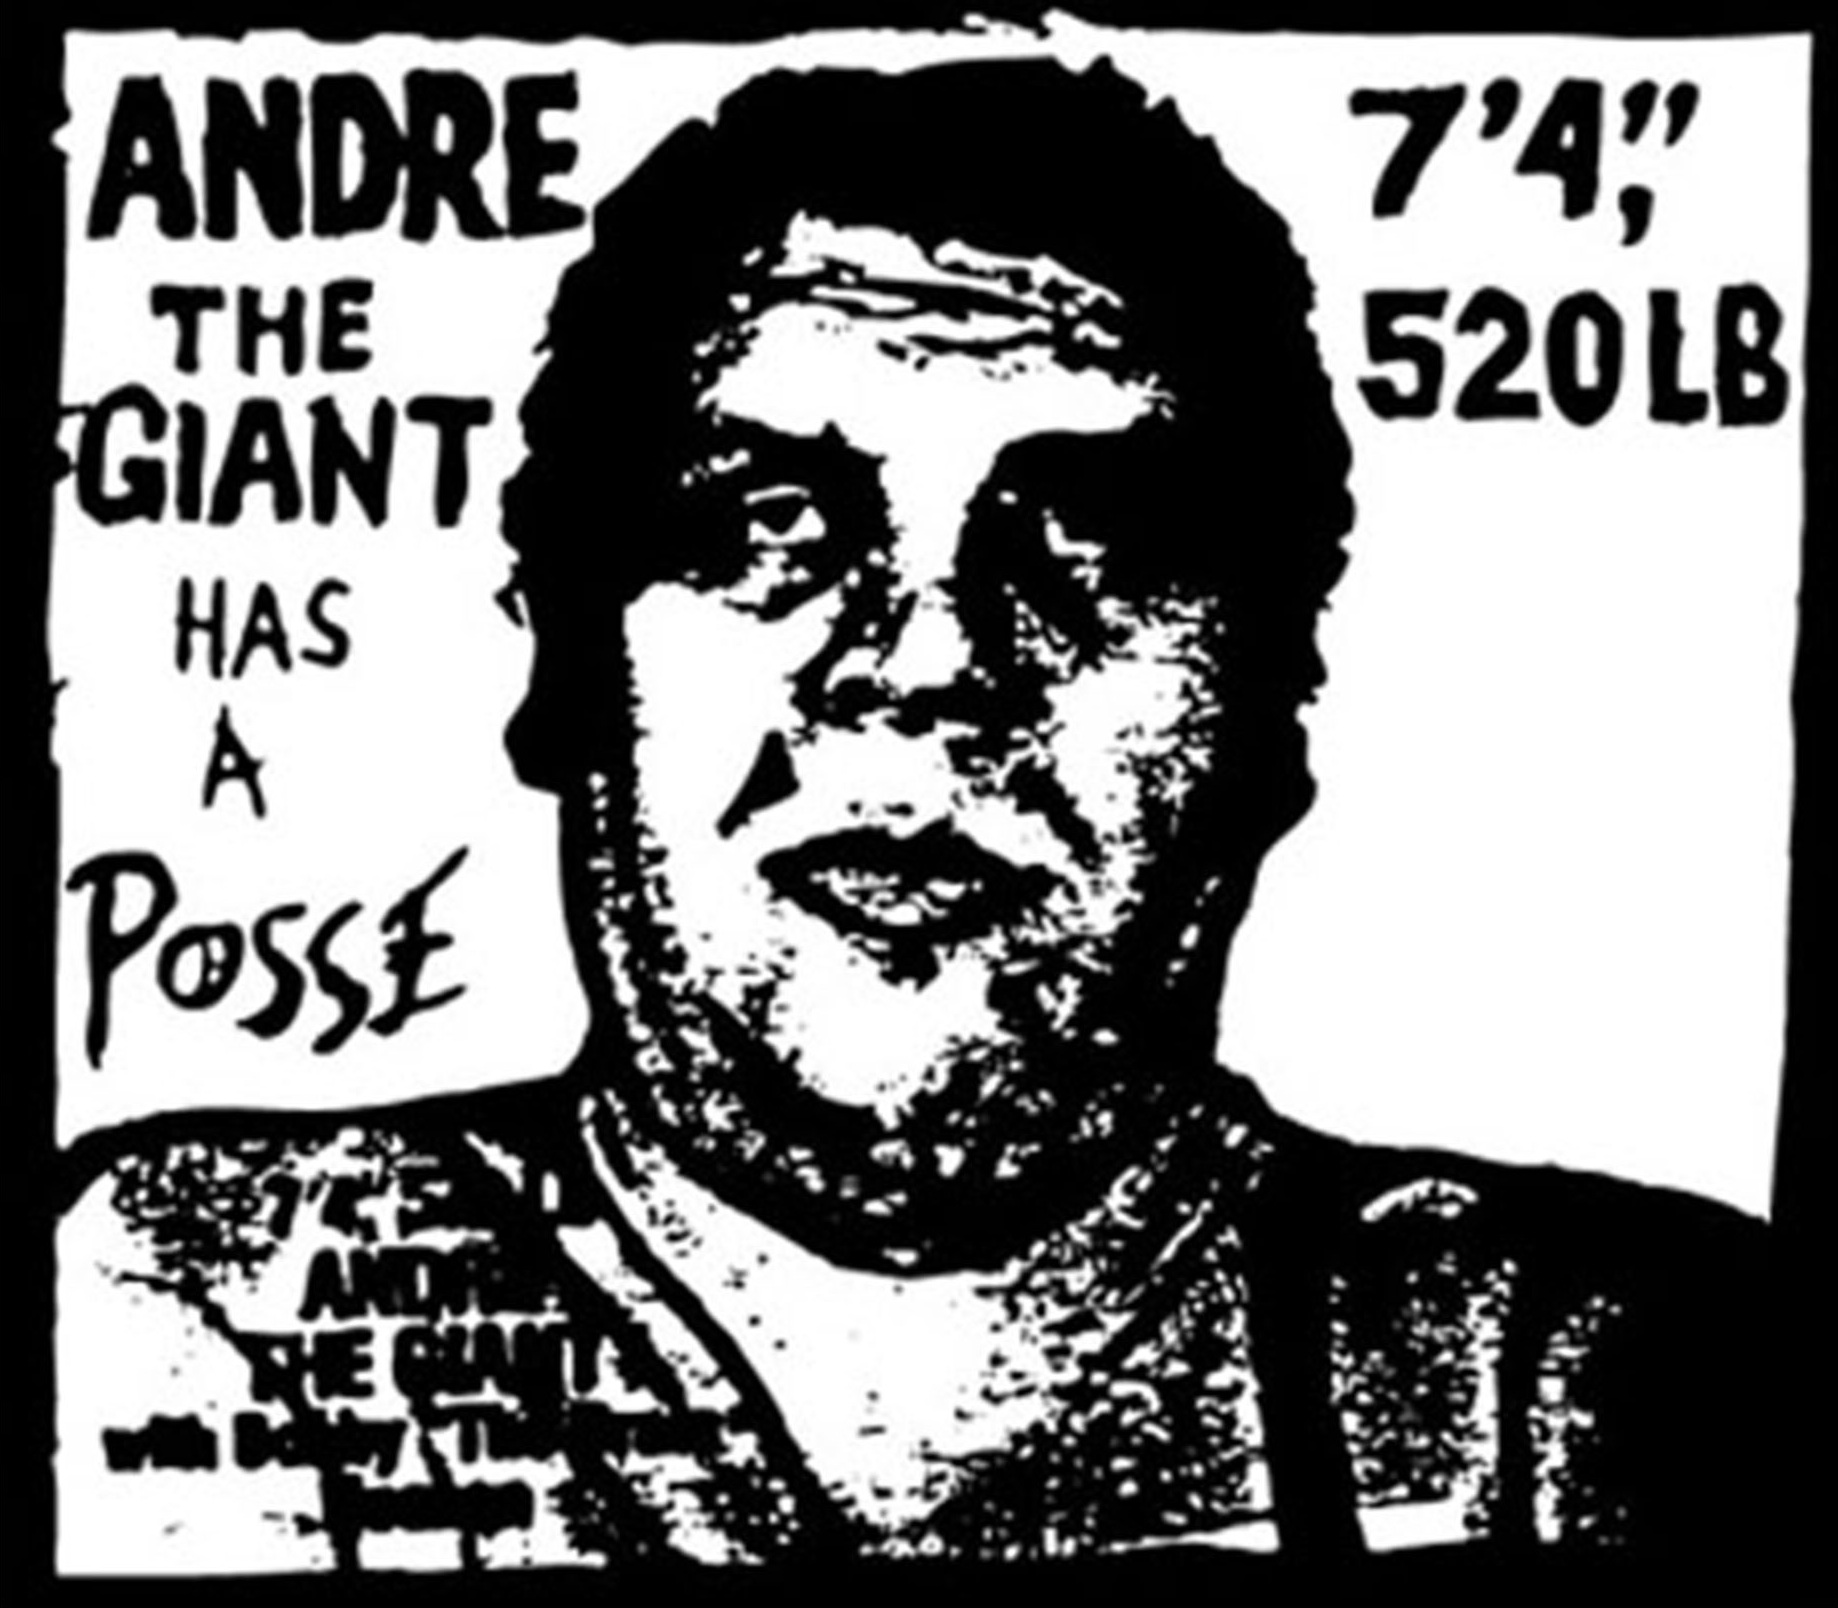 andre-the-giant-has-a-posse (1).jpg